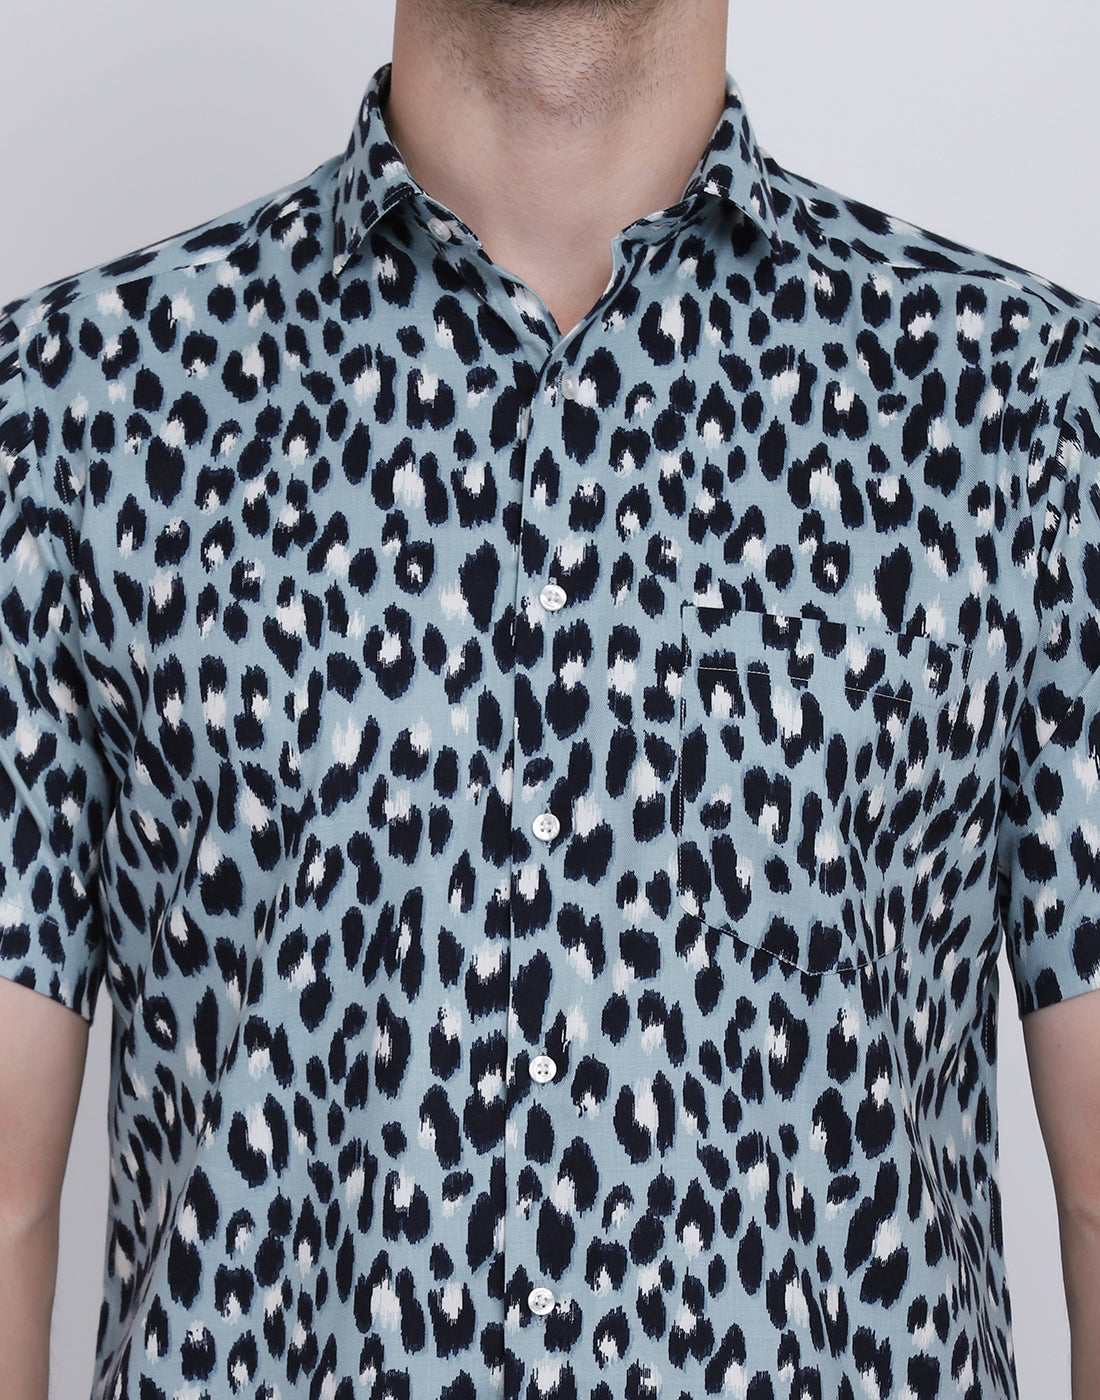 Leopard Animal Print Casual/Party Resort shirt